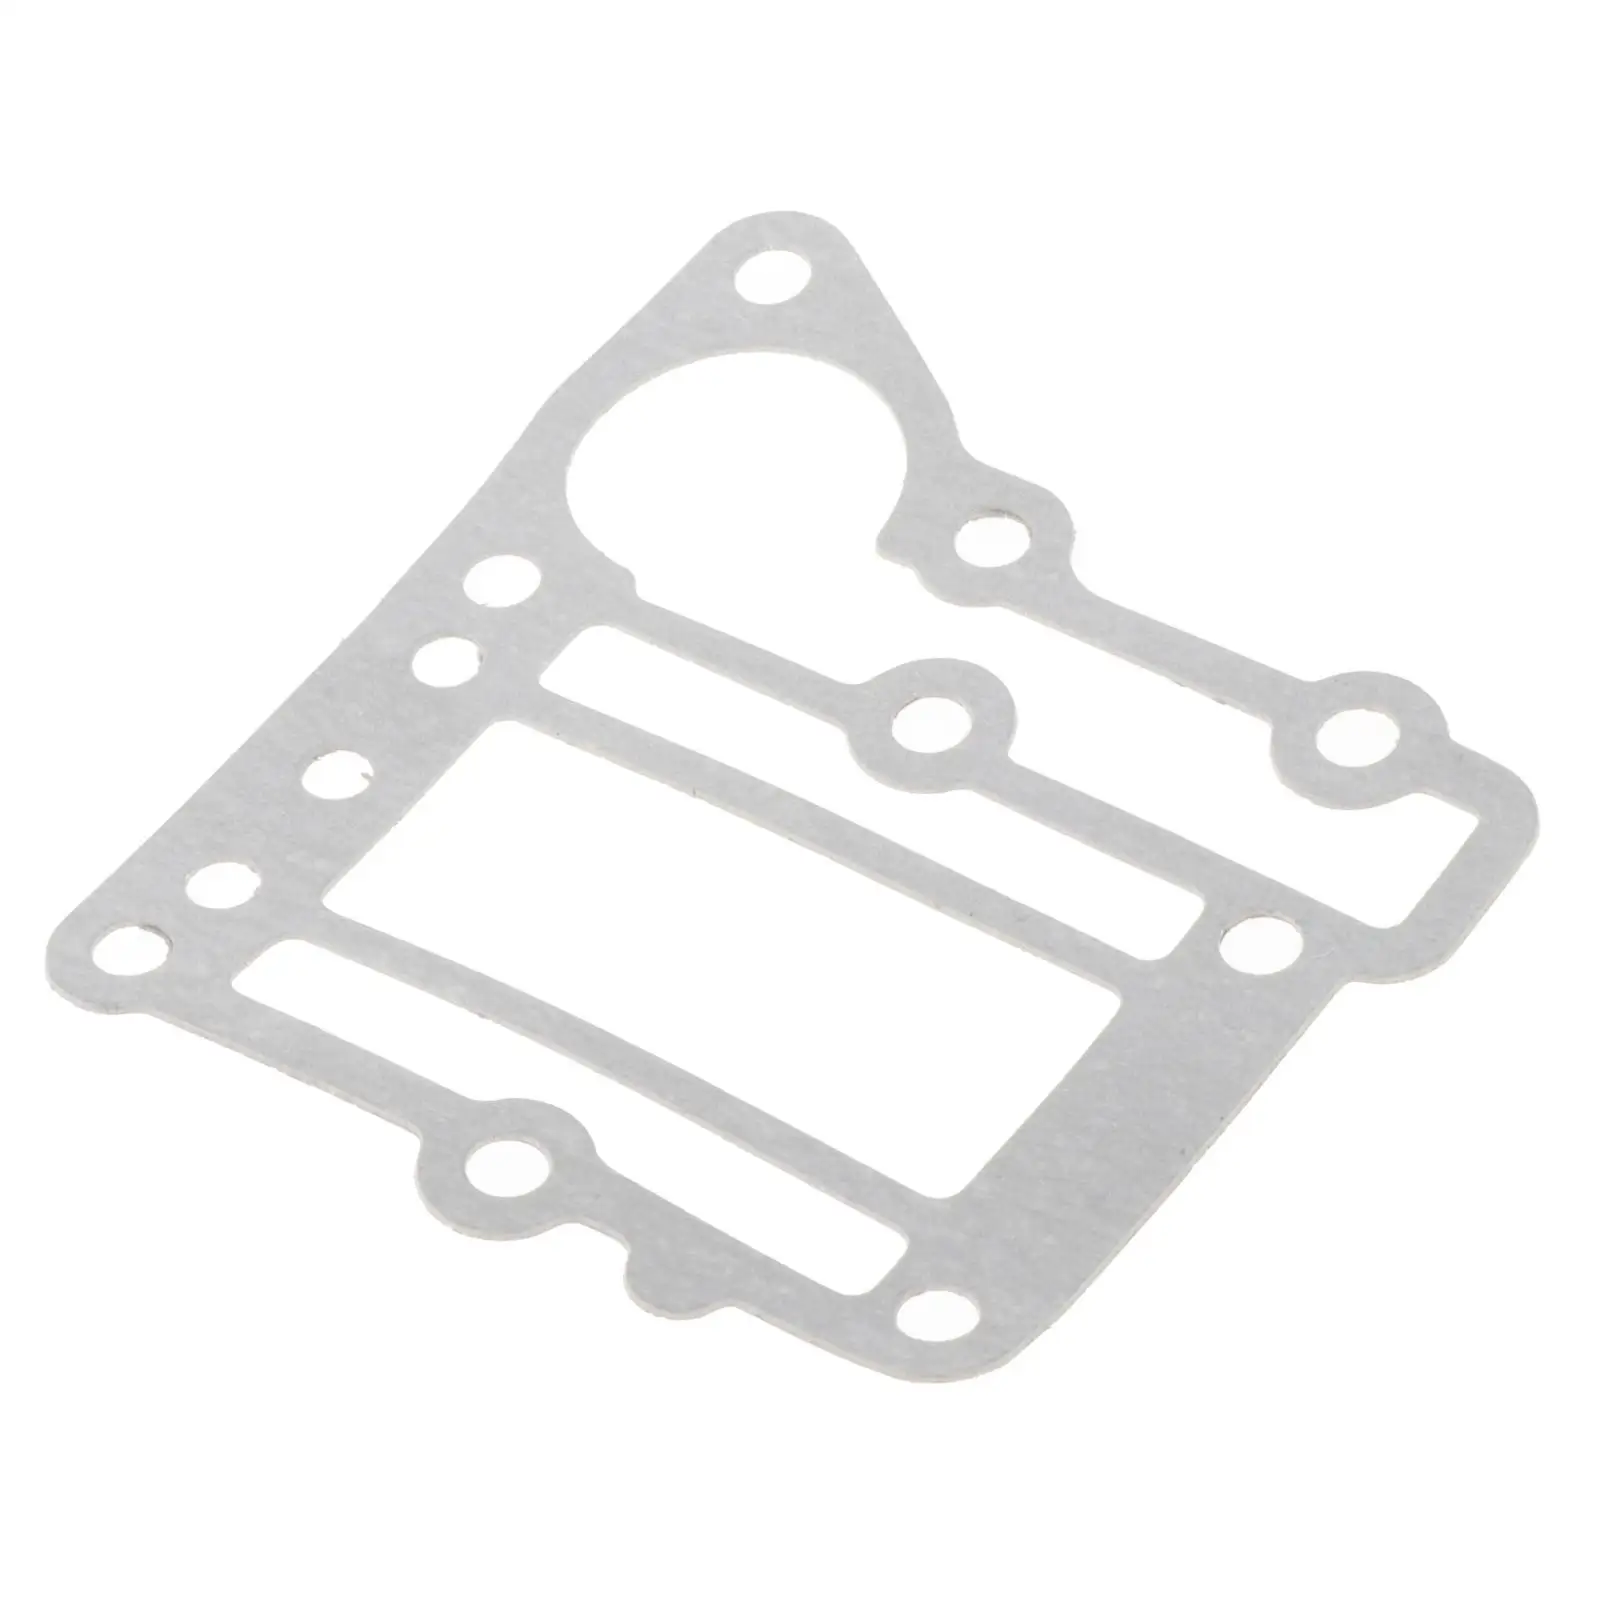 Motorbike Gasket Outer Cover, 6E3-41114-A1 Fit for  5HP Outboard